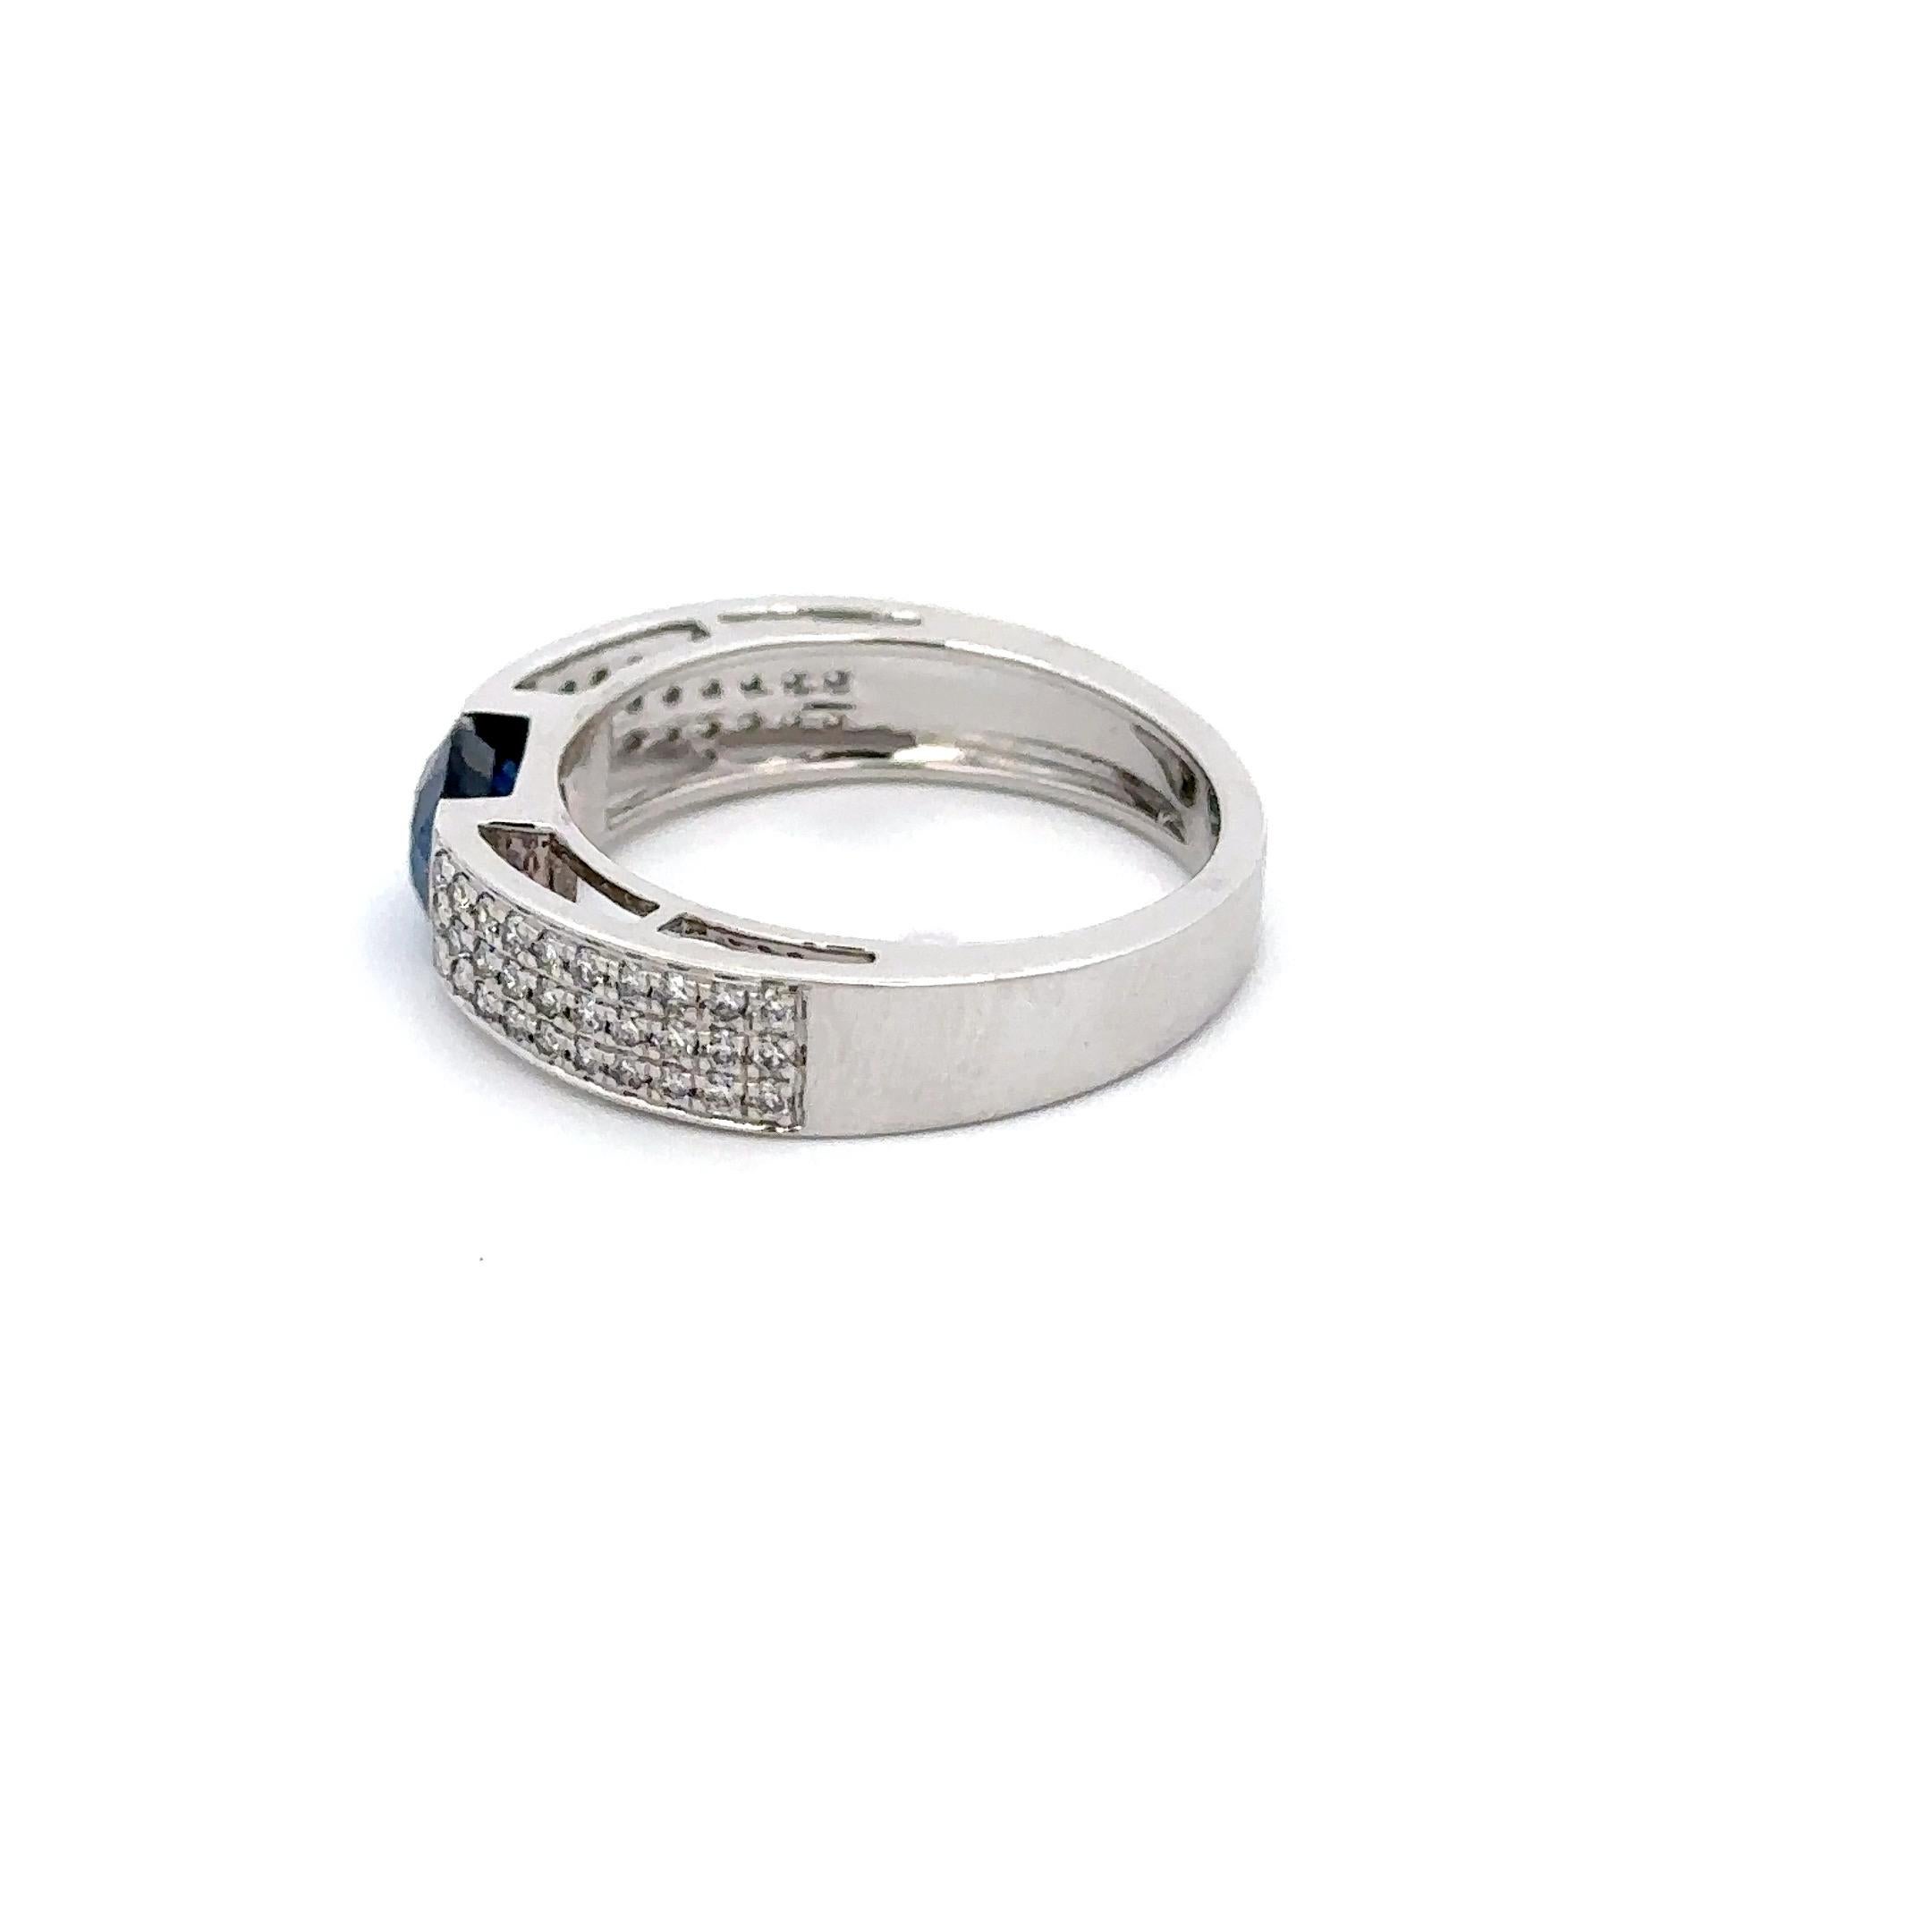 For Sale:  Unisex Diamond and Genuine Sapphire Engagement Band in 18k Solid White Gold 5